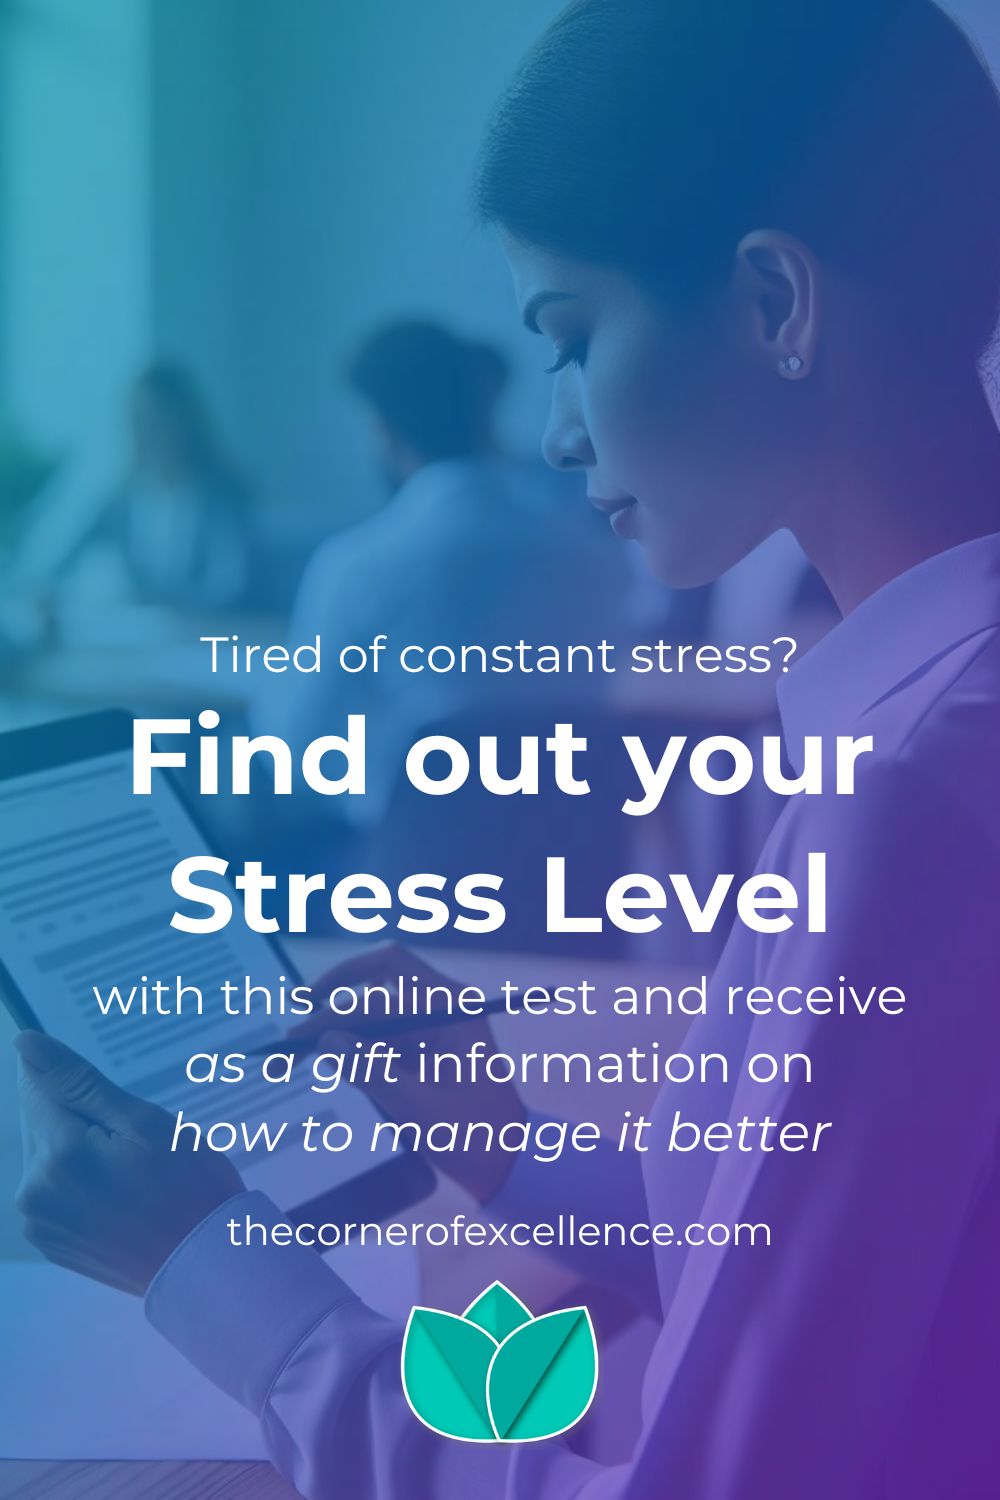 How stressed are you? Scientifically based Stress level test. Take the free Stress quiz & take away a gift to better manage stress chronic stress density